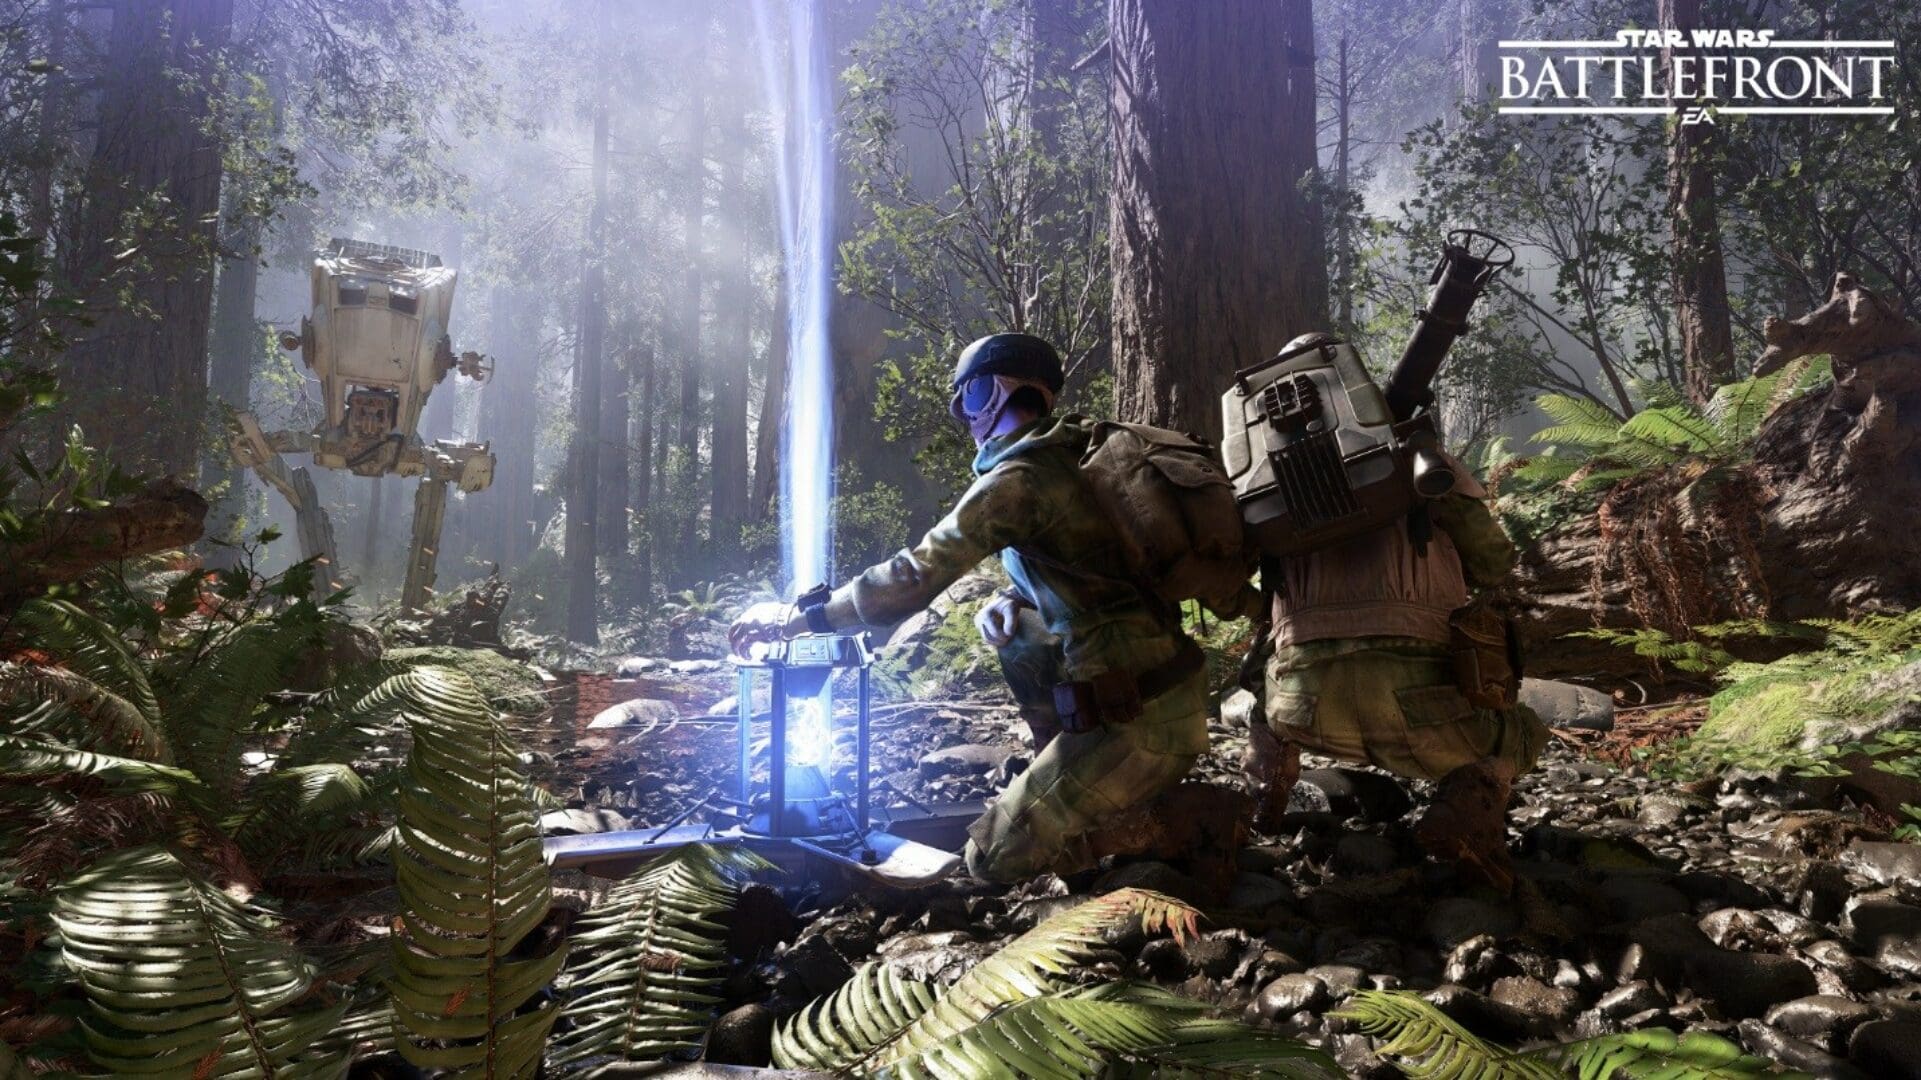 More Content Coming To Battlefront This Spring